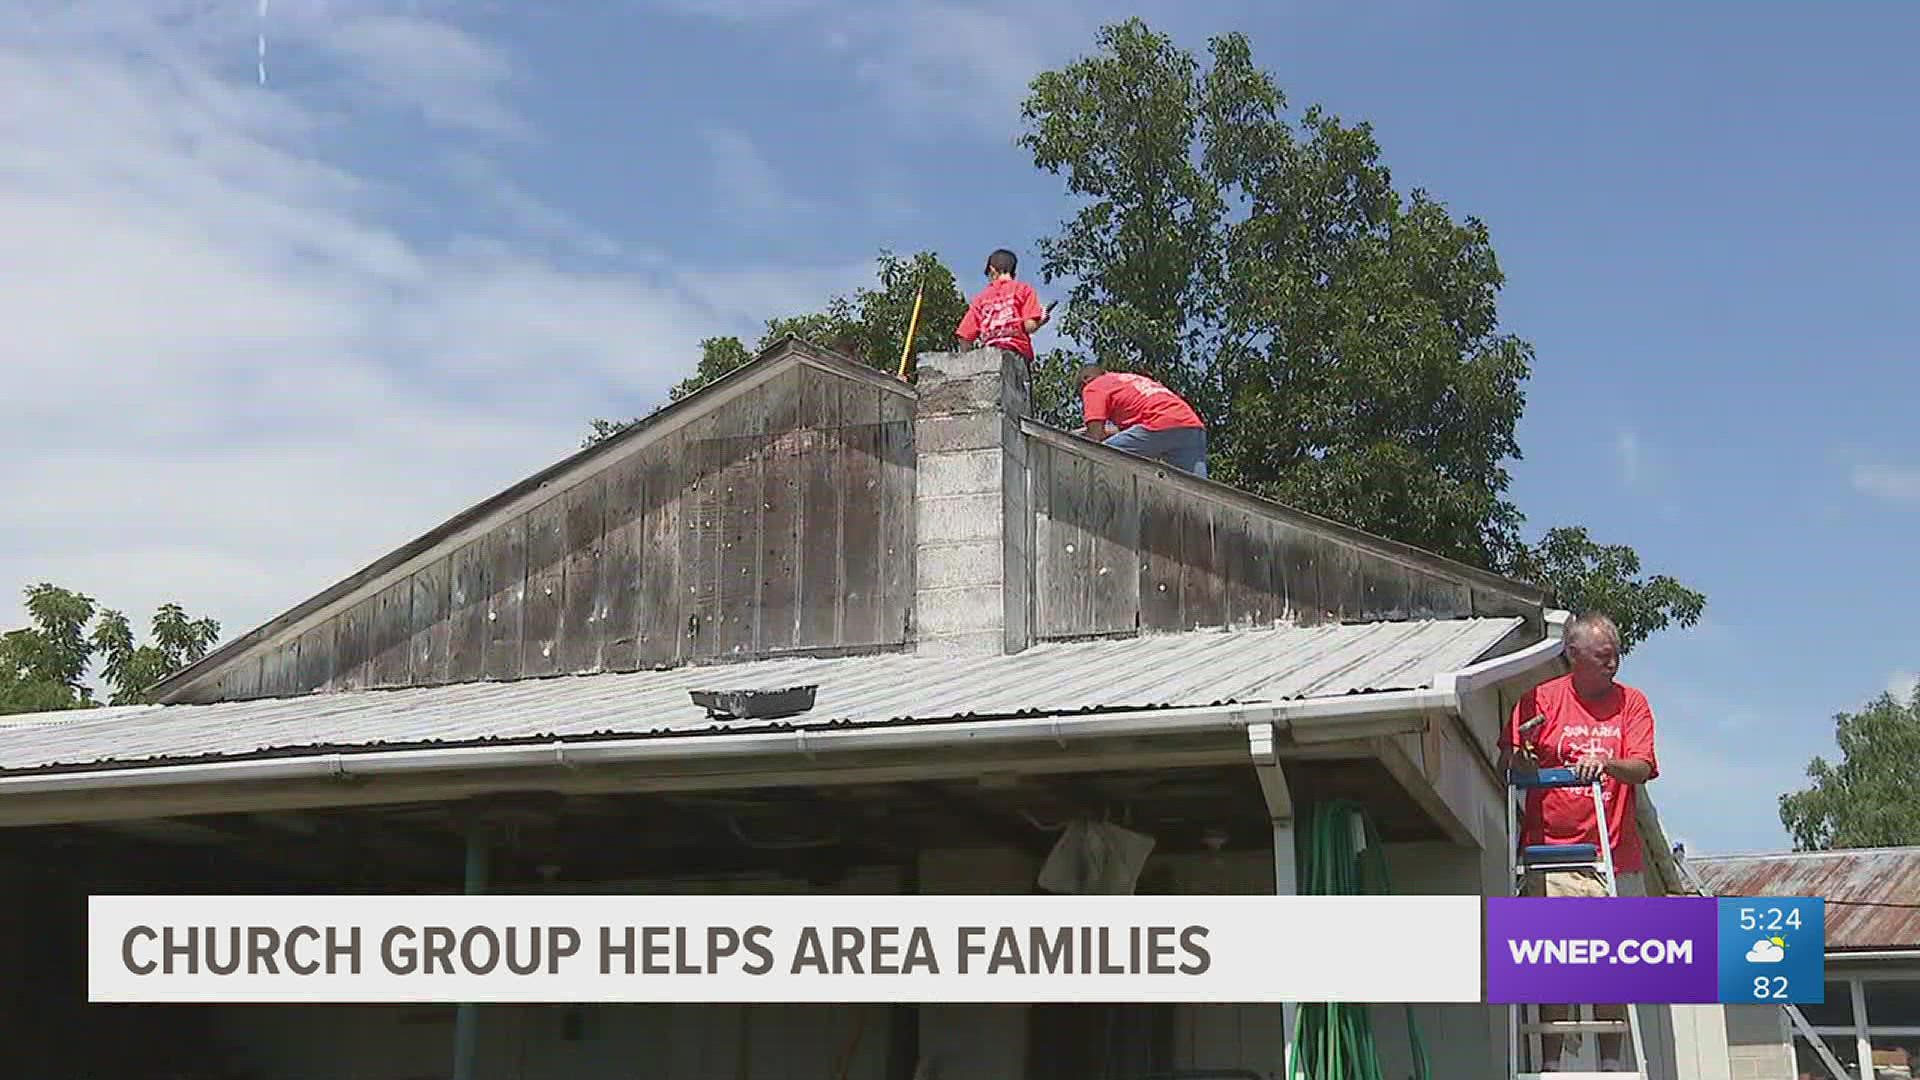 Selinsgrove Church of the Nazarene is holding a mission trip this week and fixing up nearly 30 properties.